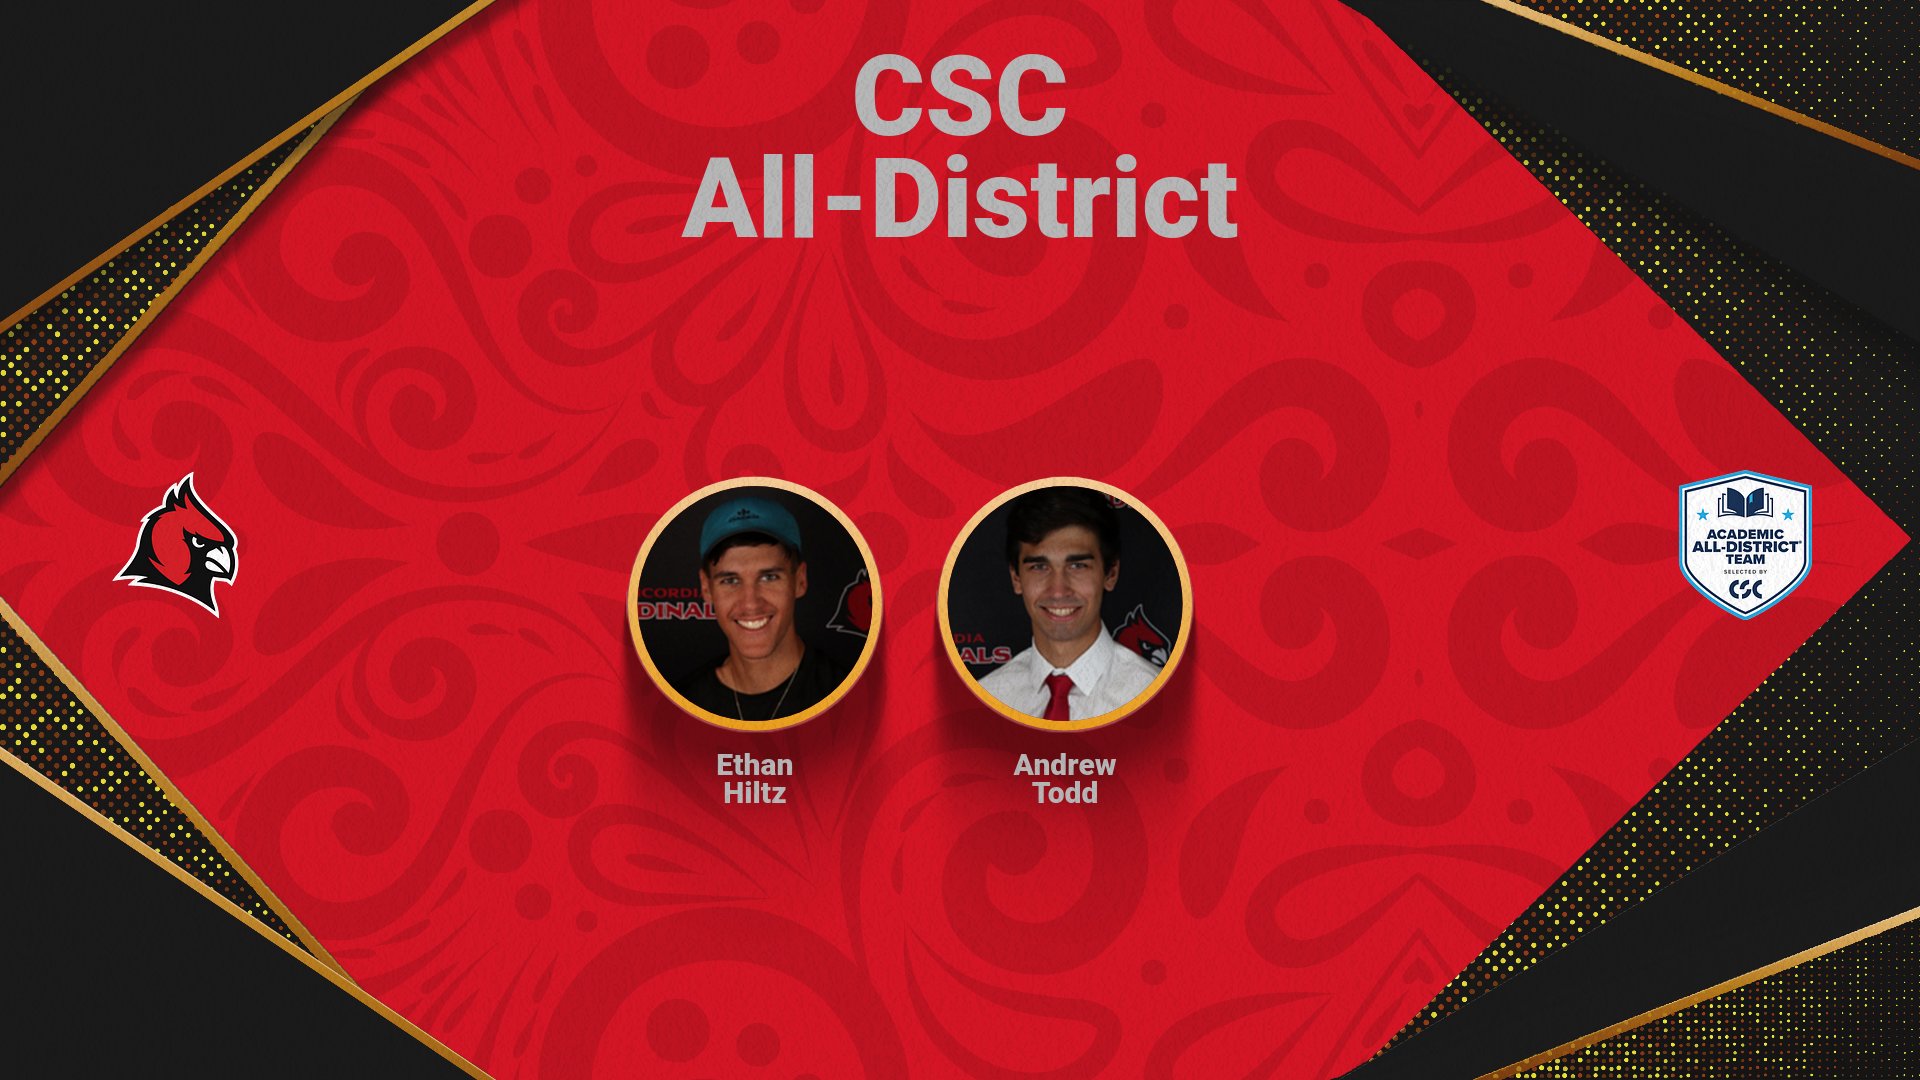 Hiltz and Todd named to CSC Academic All-District team